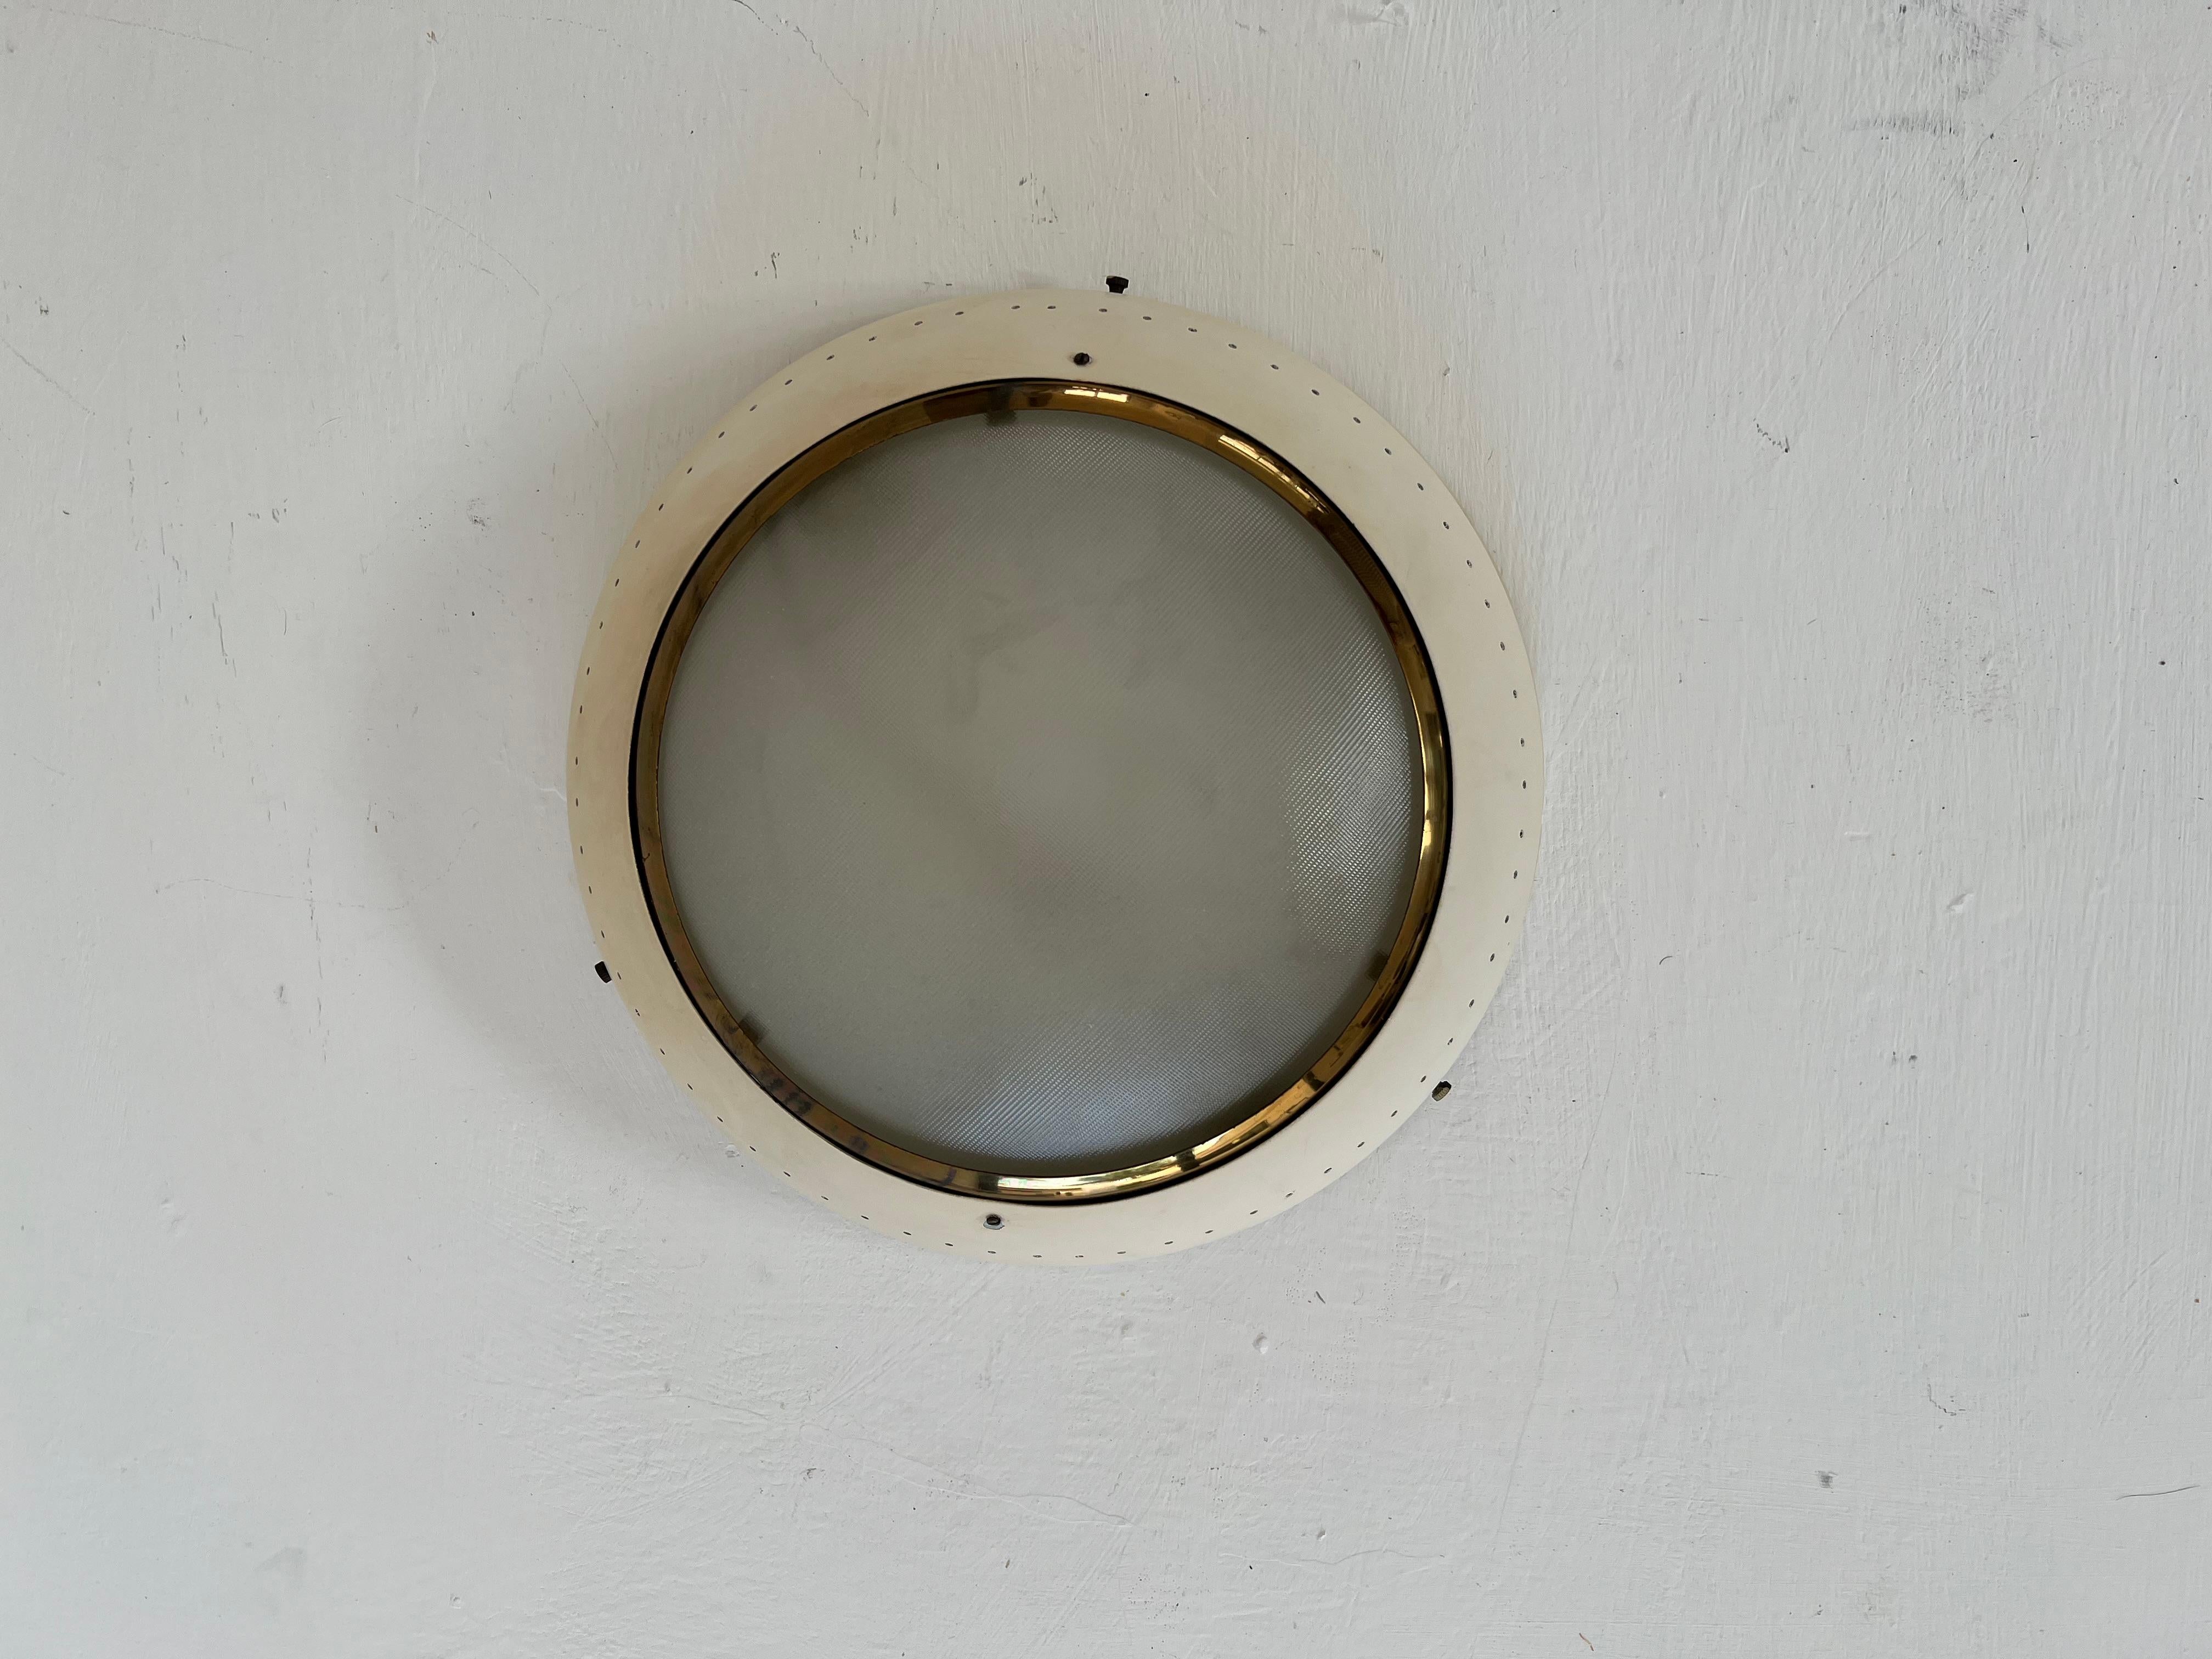 Beautiful and unique Modernist Flush Mount or Sconce.
This is manufactured in brass, pressed glass and aluminum and holds 2 e14 bulbs.
We have not been able to attribute it to any specific factory but the designand materials are very similar to